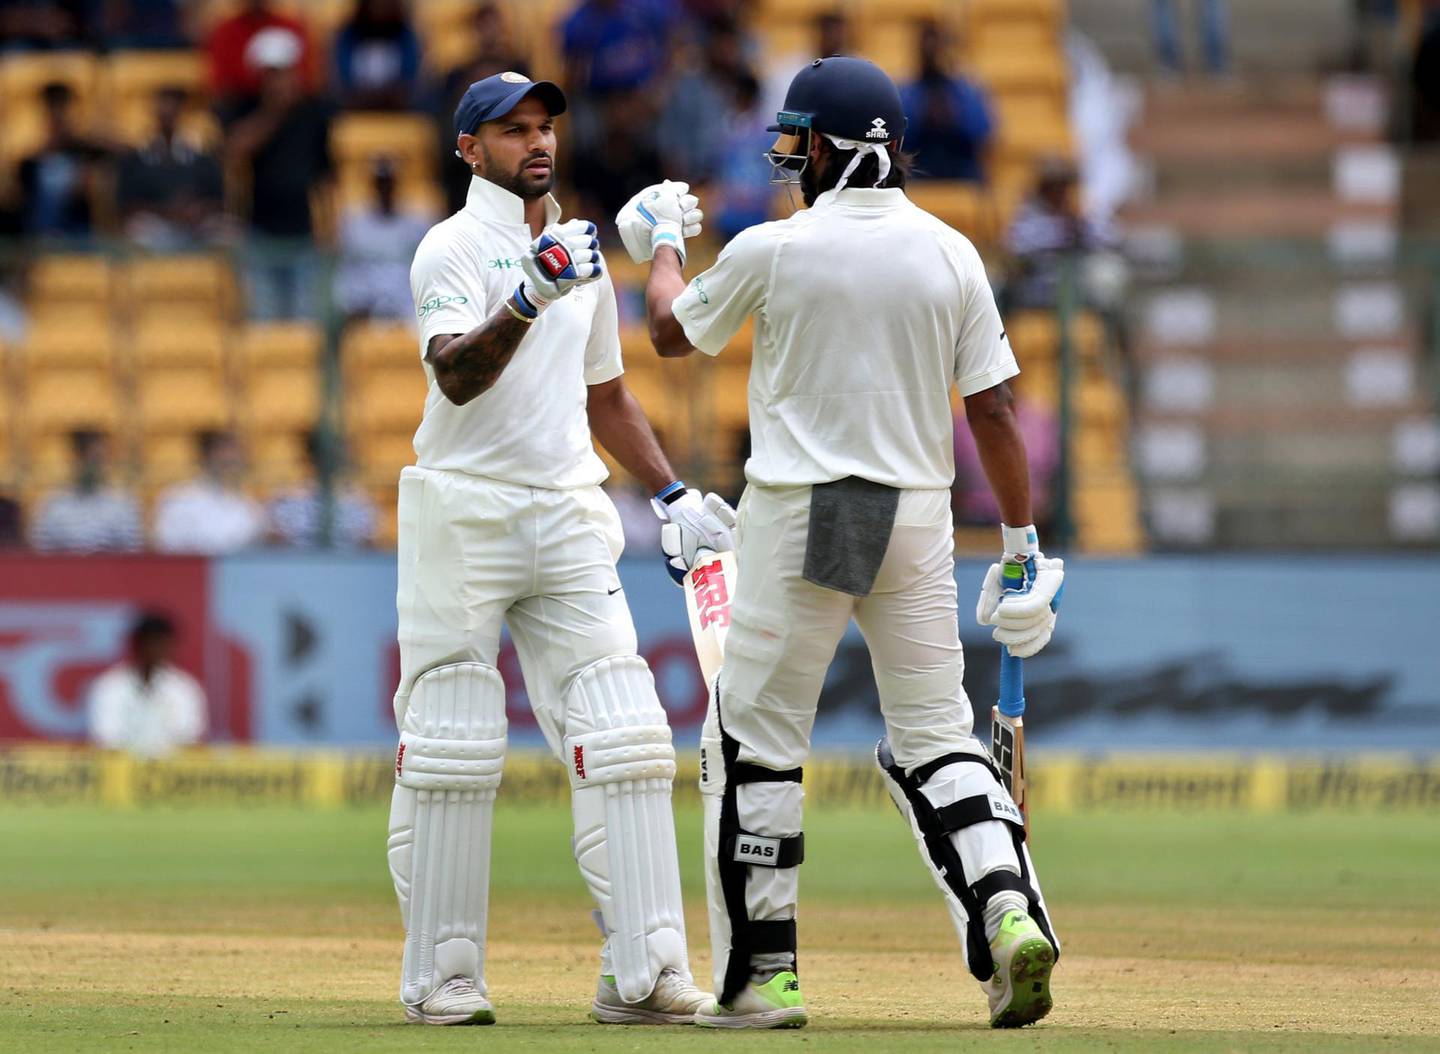 India's Murali Vijay, right, greets teammate Shikhar Dhawan, left, on hitting a boundary during the one-off cricket test match against Afghanistan in Bangalore, India, Thursday, June 14, 2018. (AP Photo/Aijaz Rahi)